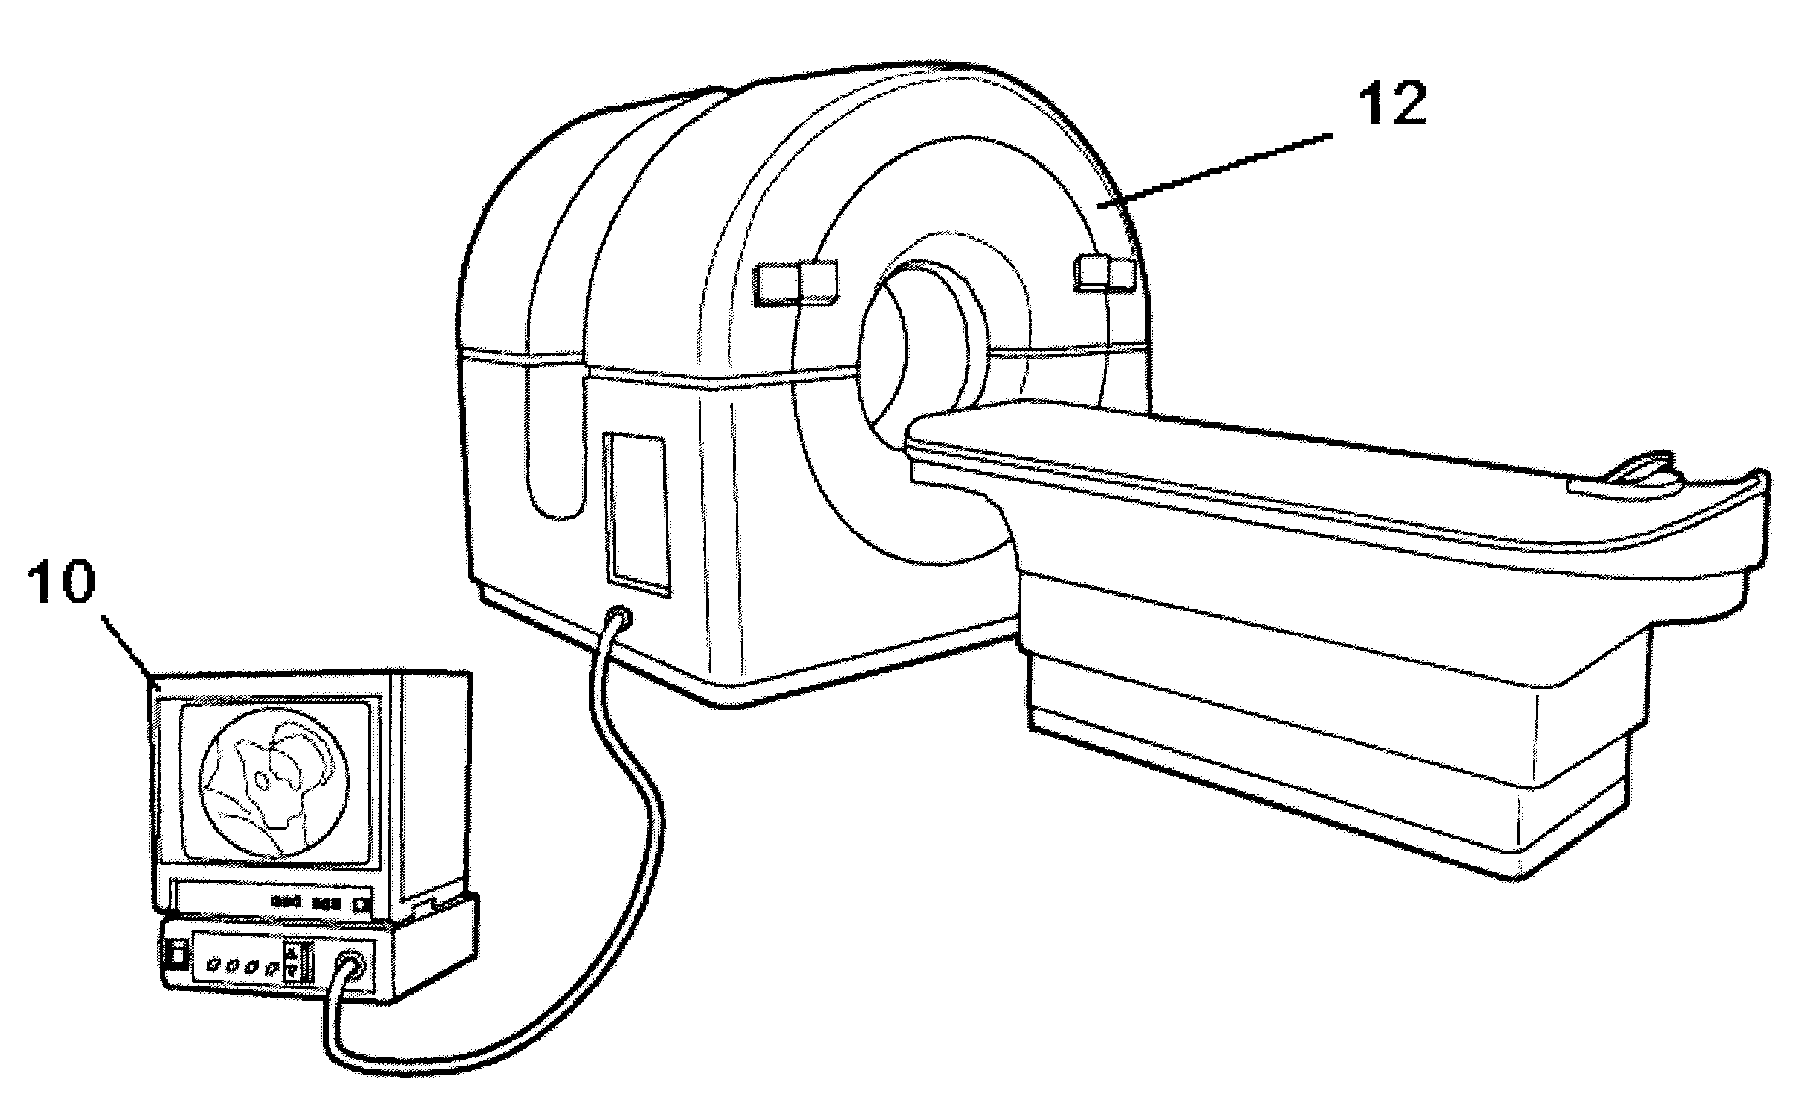 Computer program, method, and system for hybrid CT attenuation correction